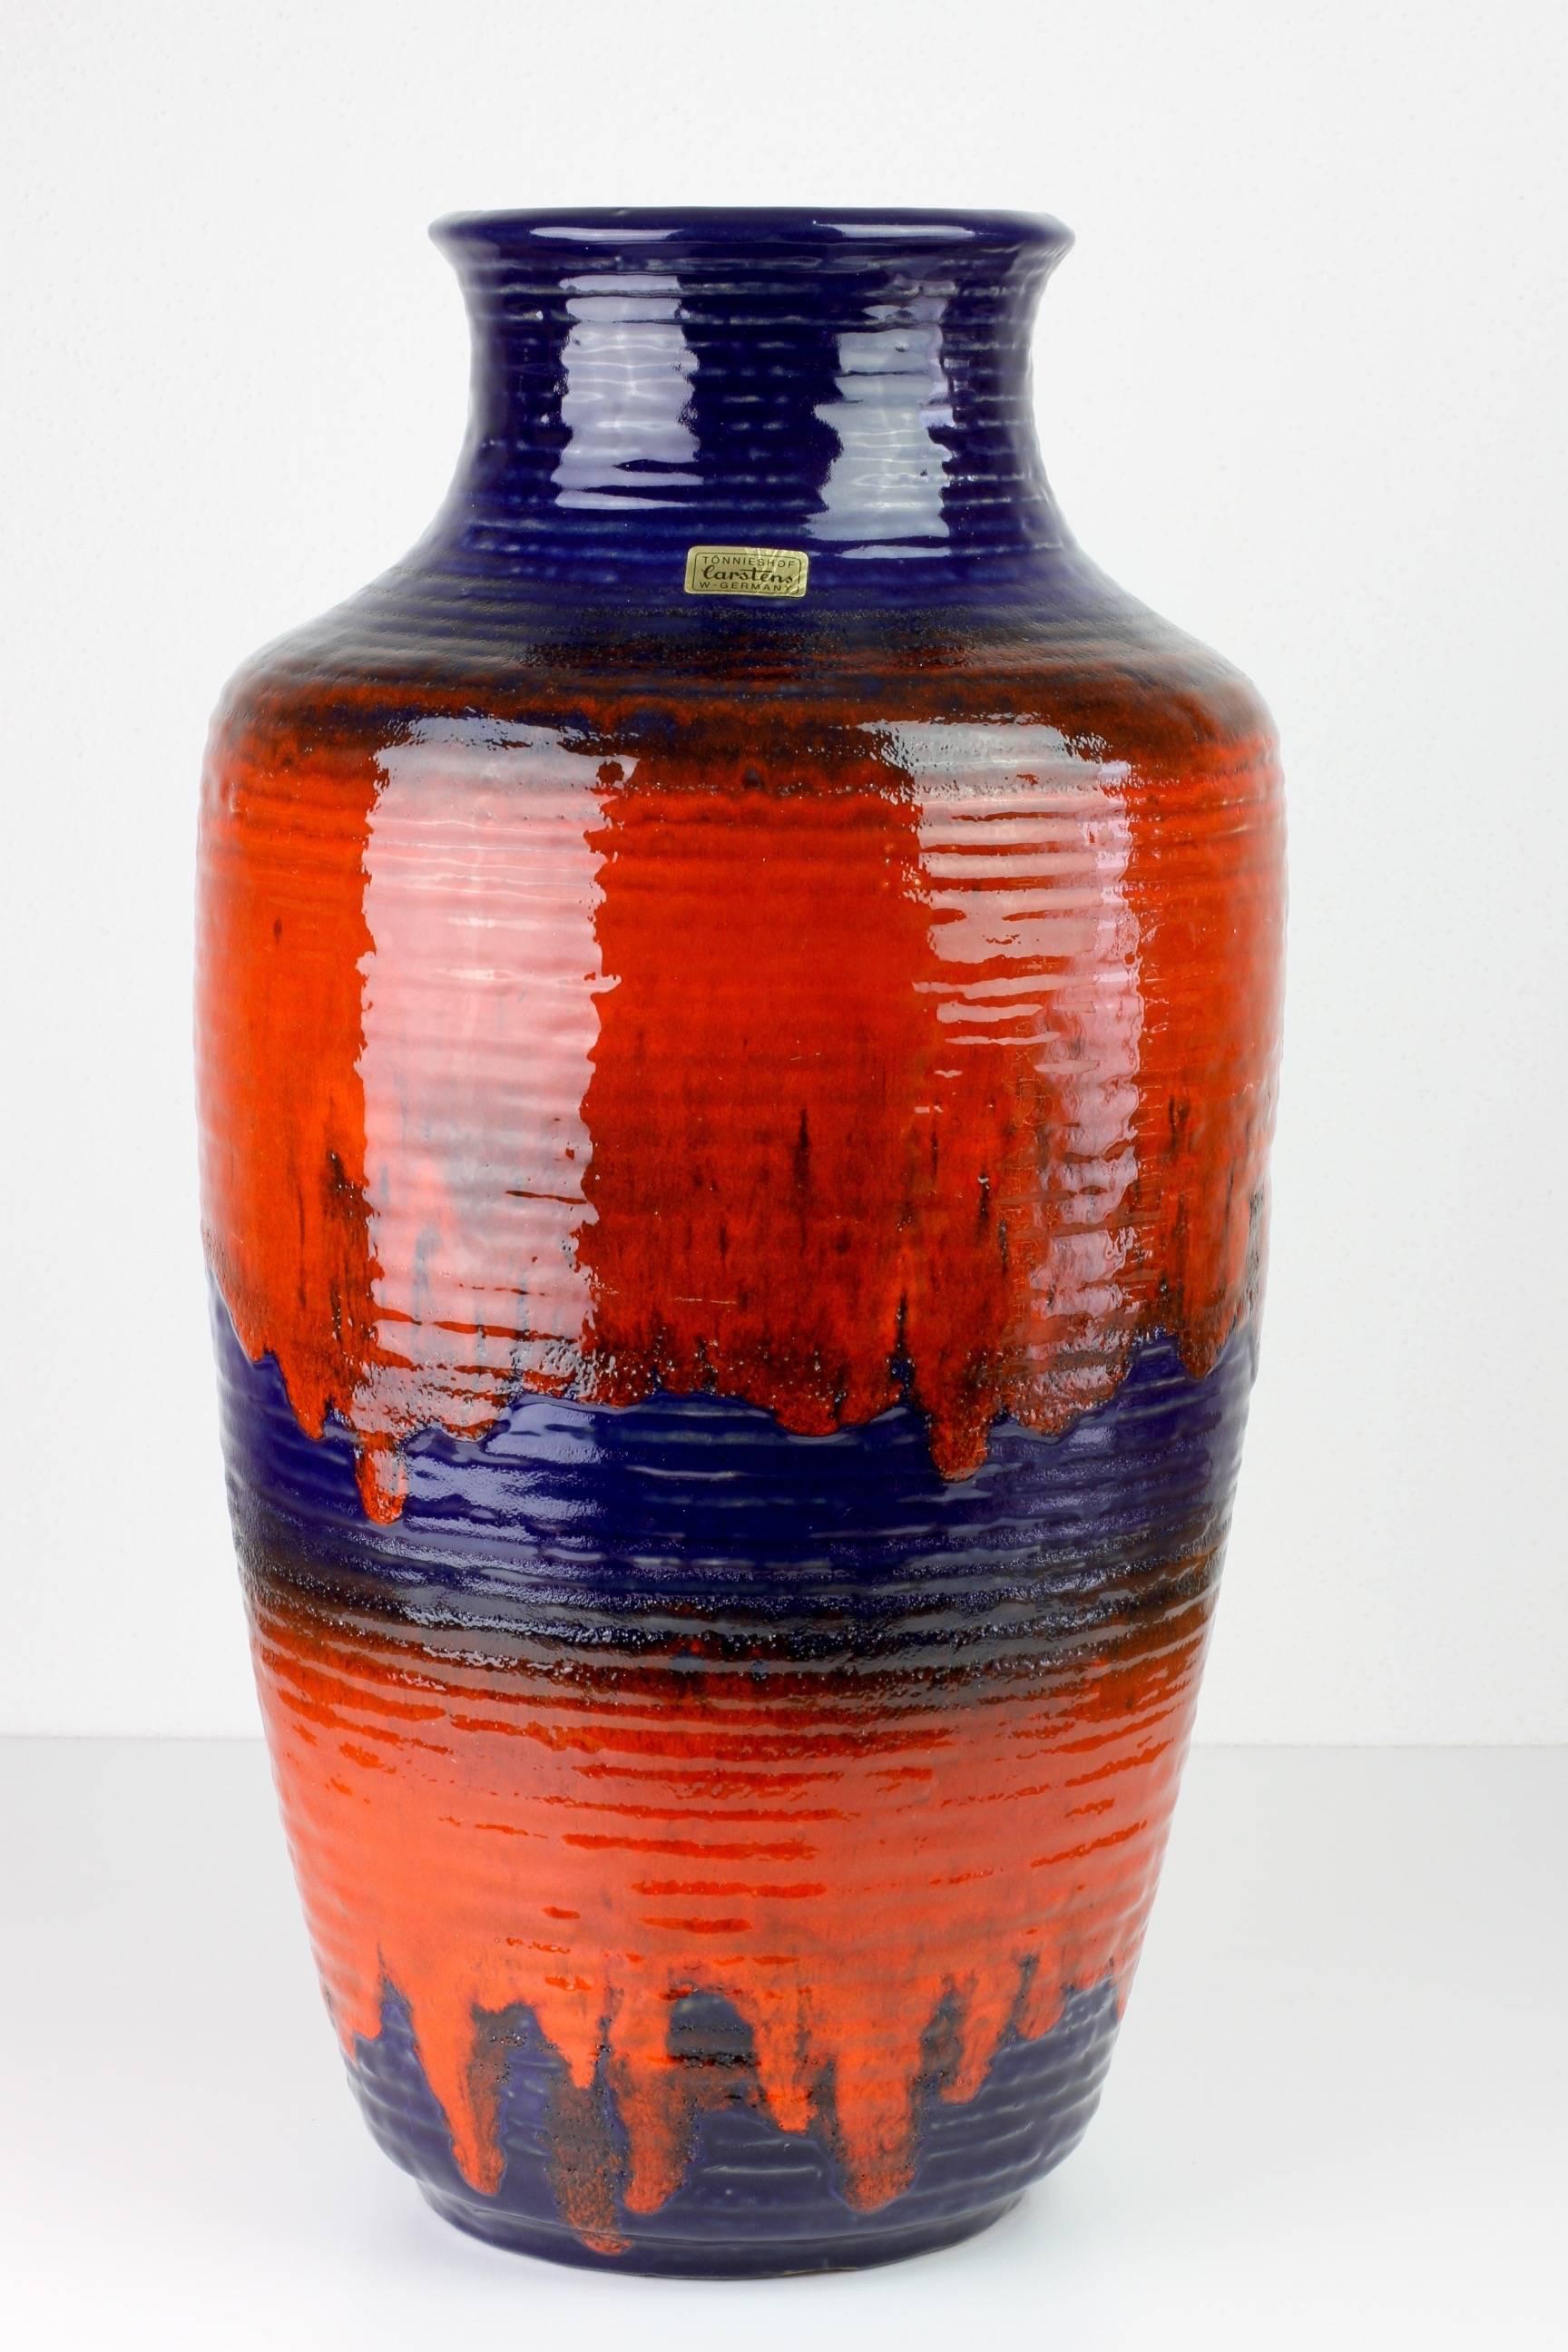 Beautifully turned and glazed floor vase by Carstens Tonniesh of circa 1960-1970. Carstens are considered to be one of the finest producers of West German Pottery from the Mid-Century era. This vase stands beautifully with its simple yet elegant